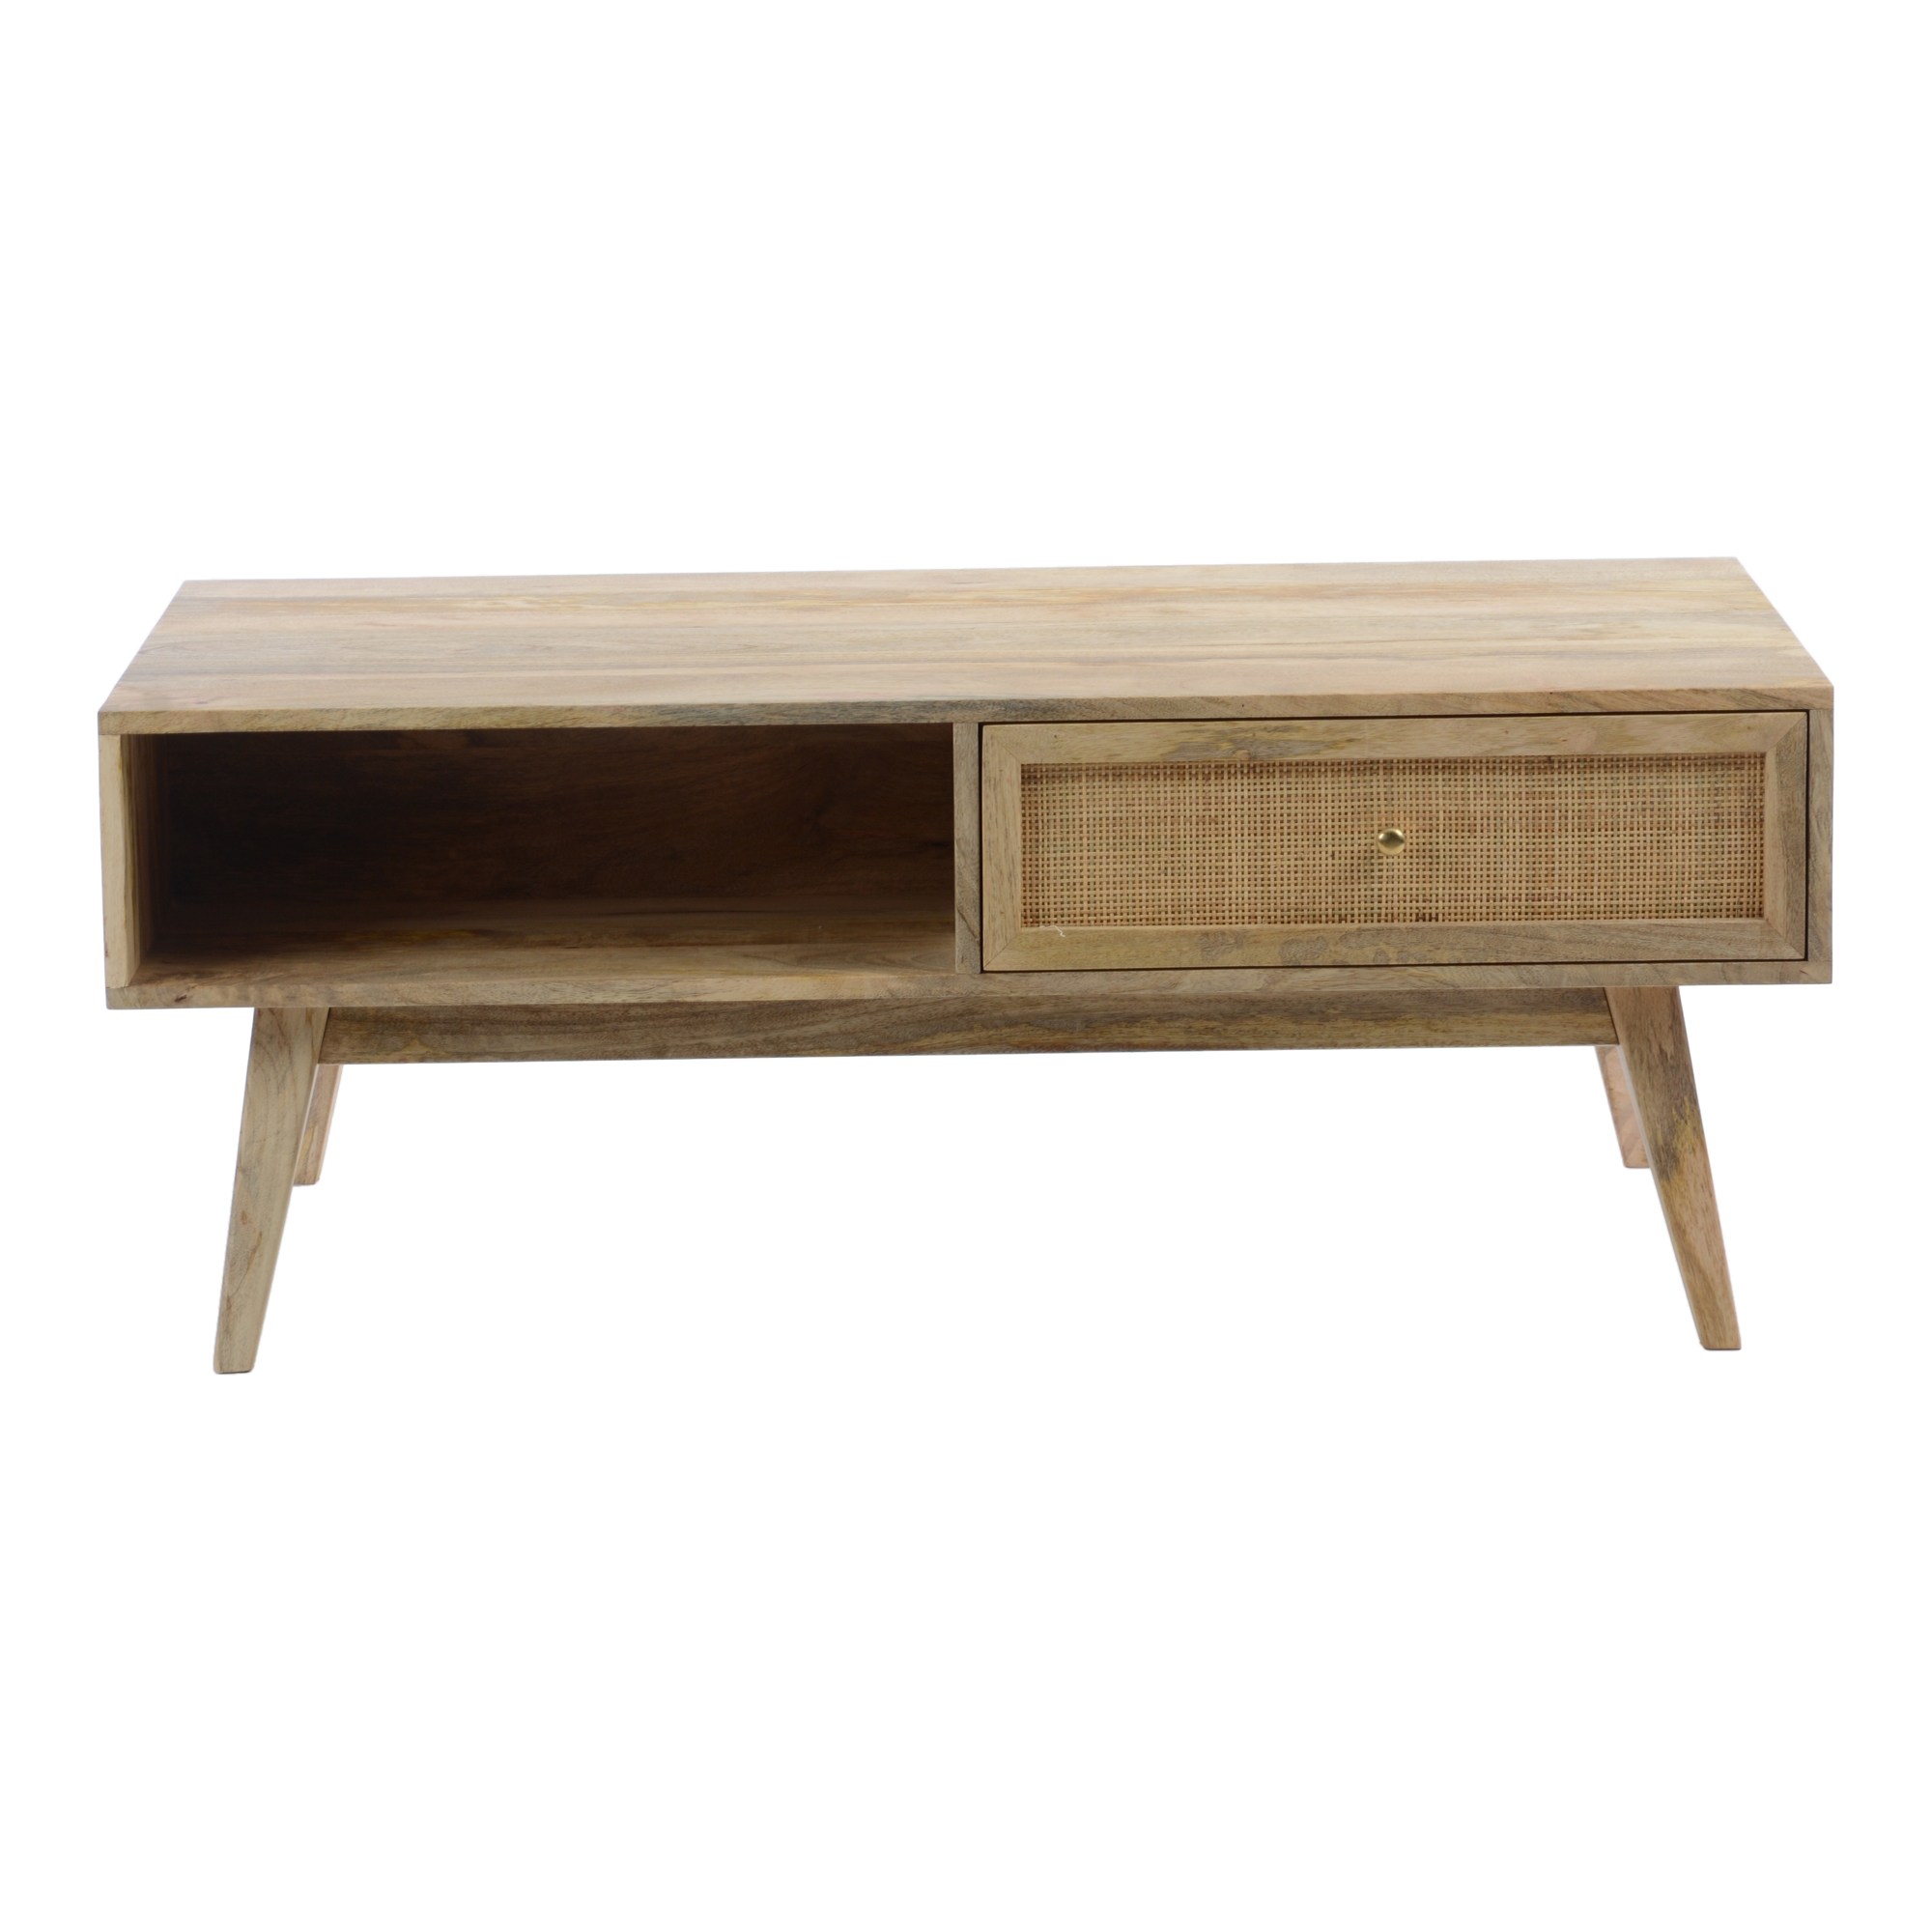 REED COFFEE TABLE - Image 0